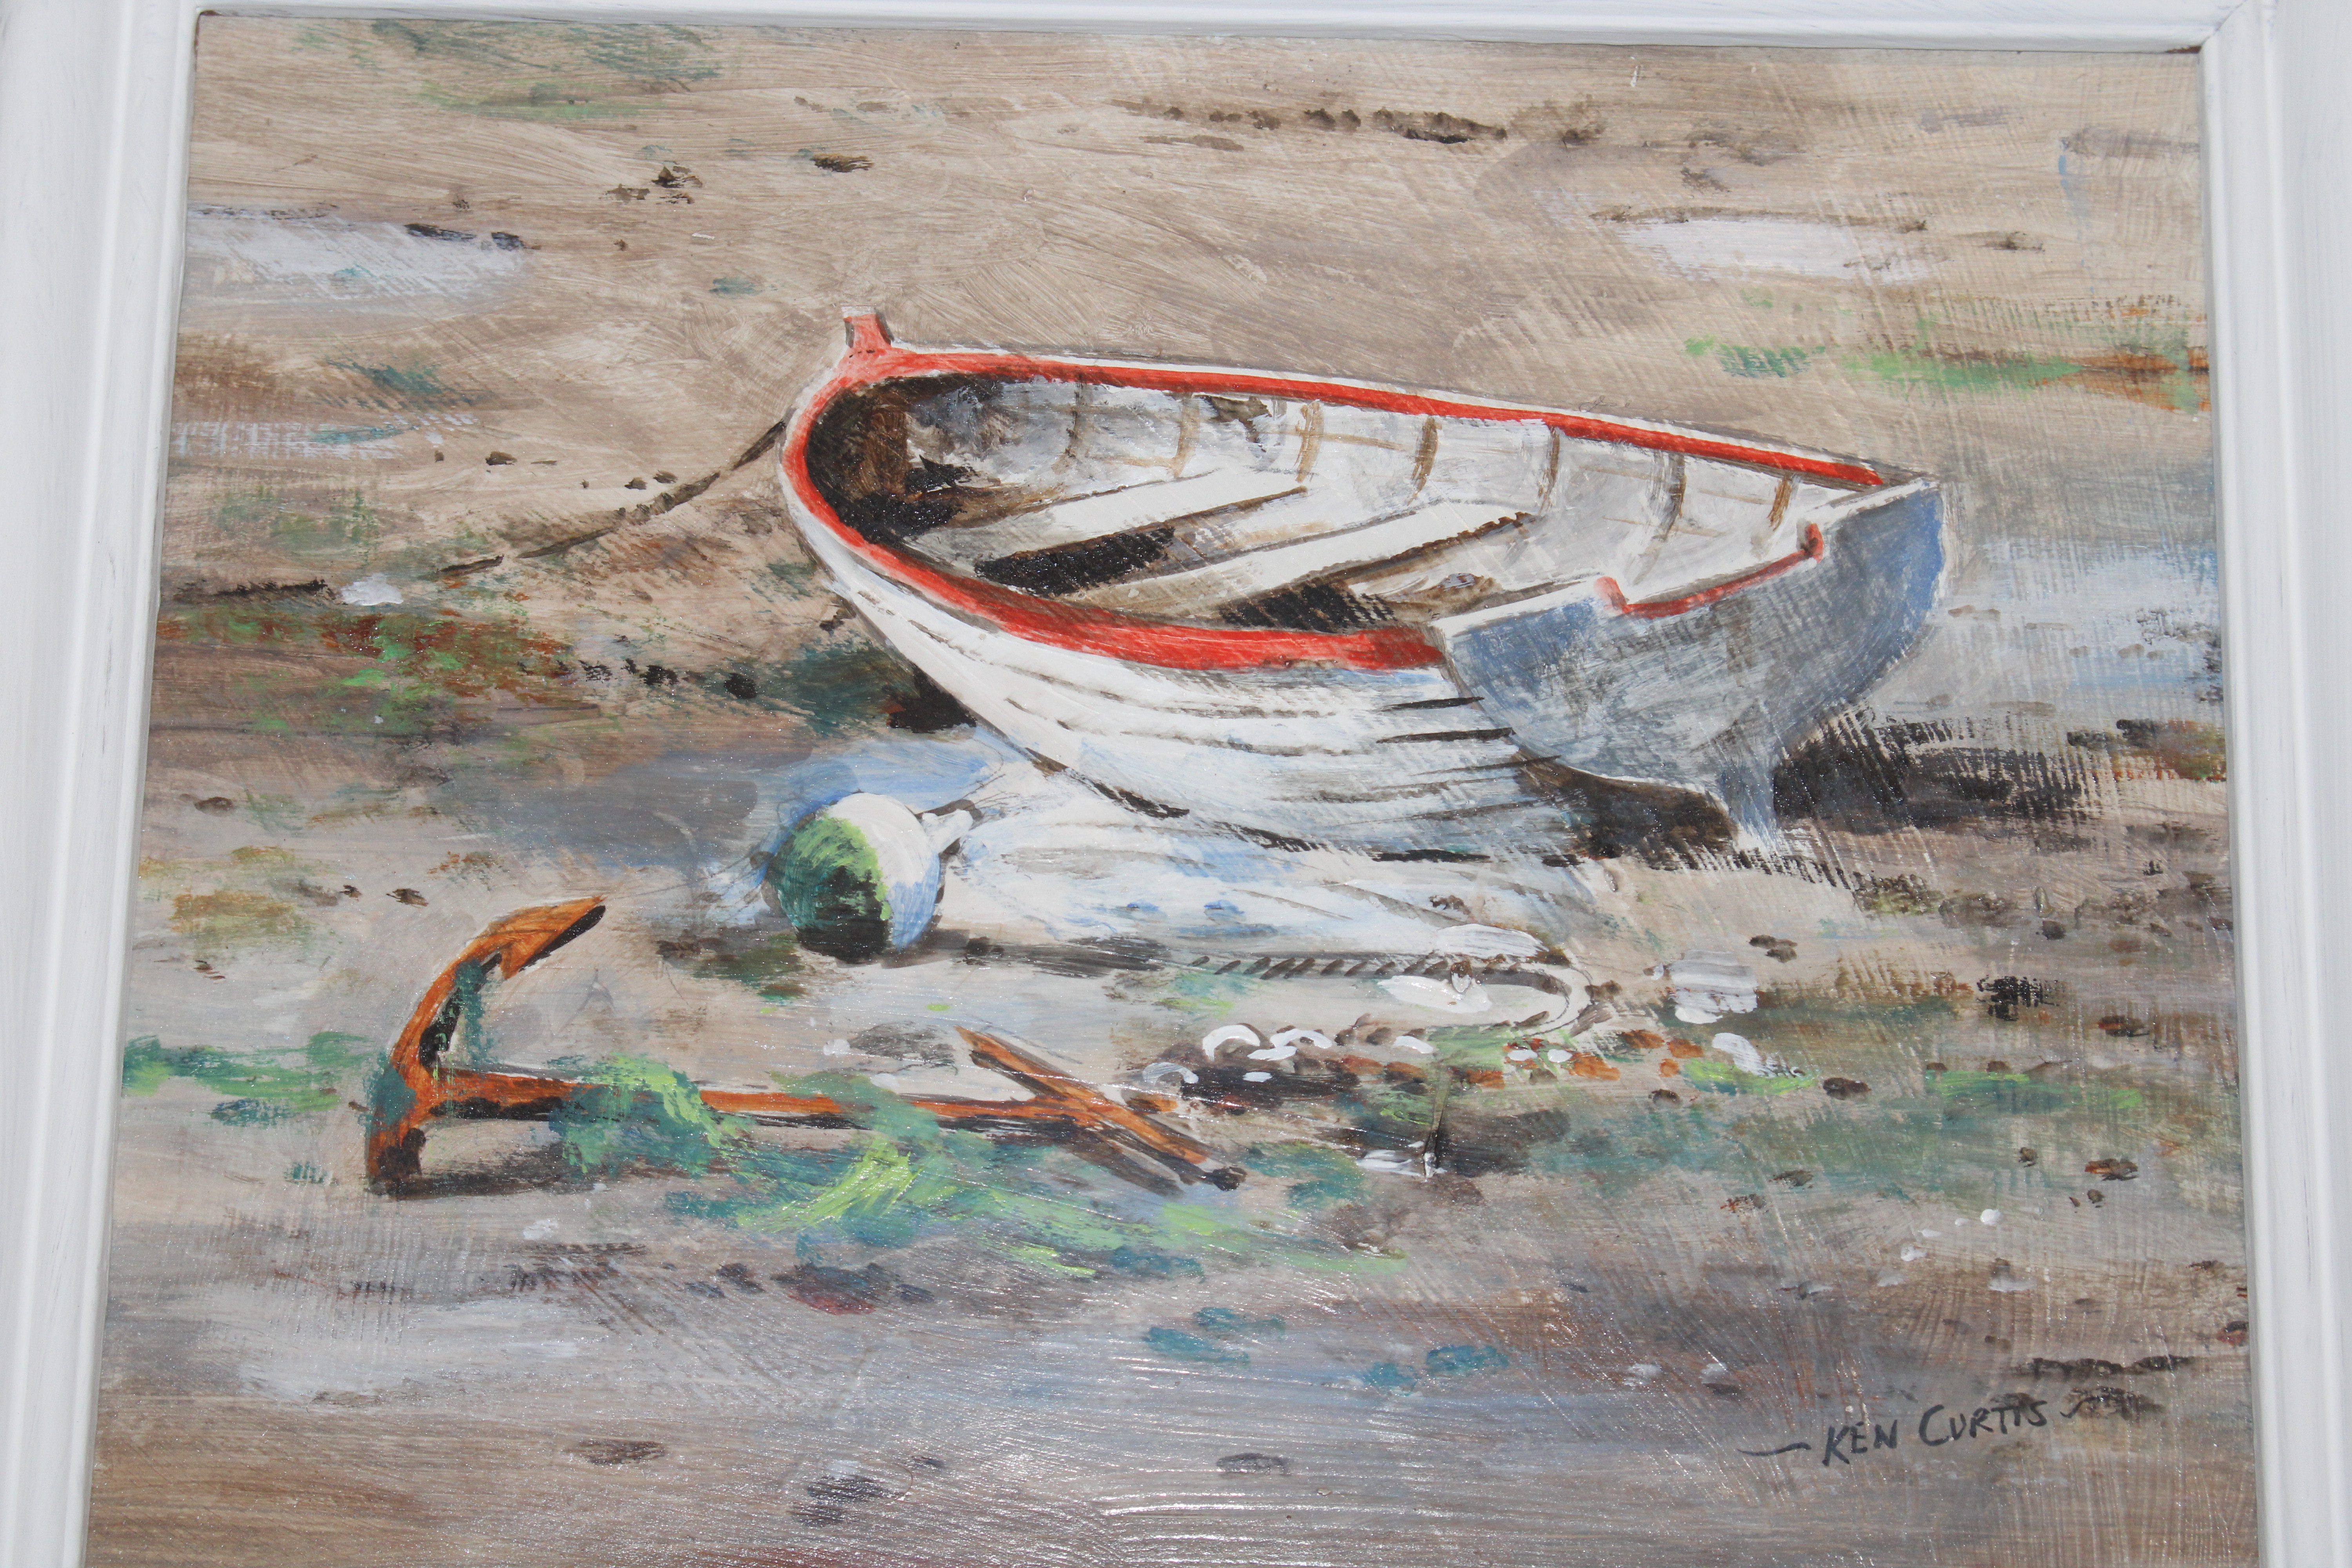 Ken Curtis, acrylic "Dinghy At Pin Mill" - Image 2 of 3